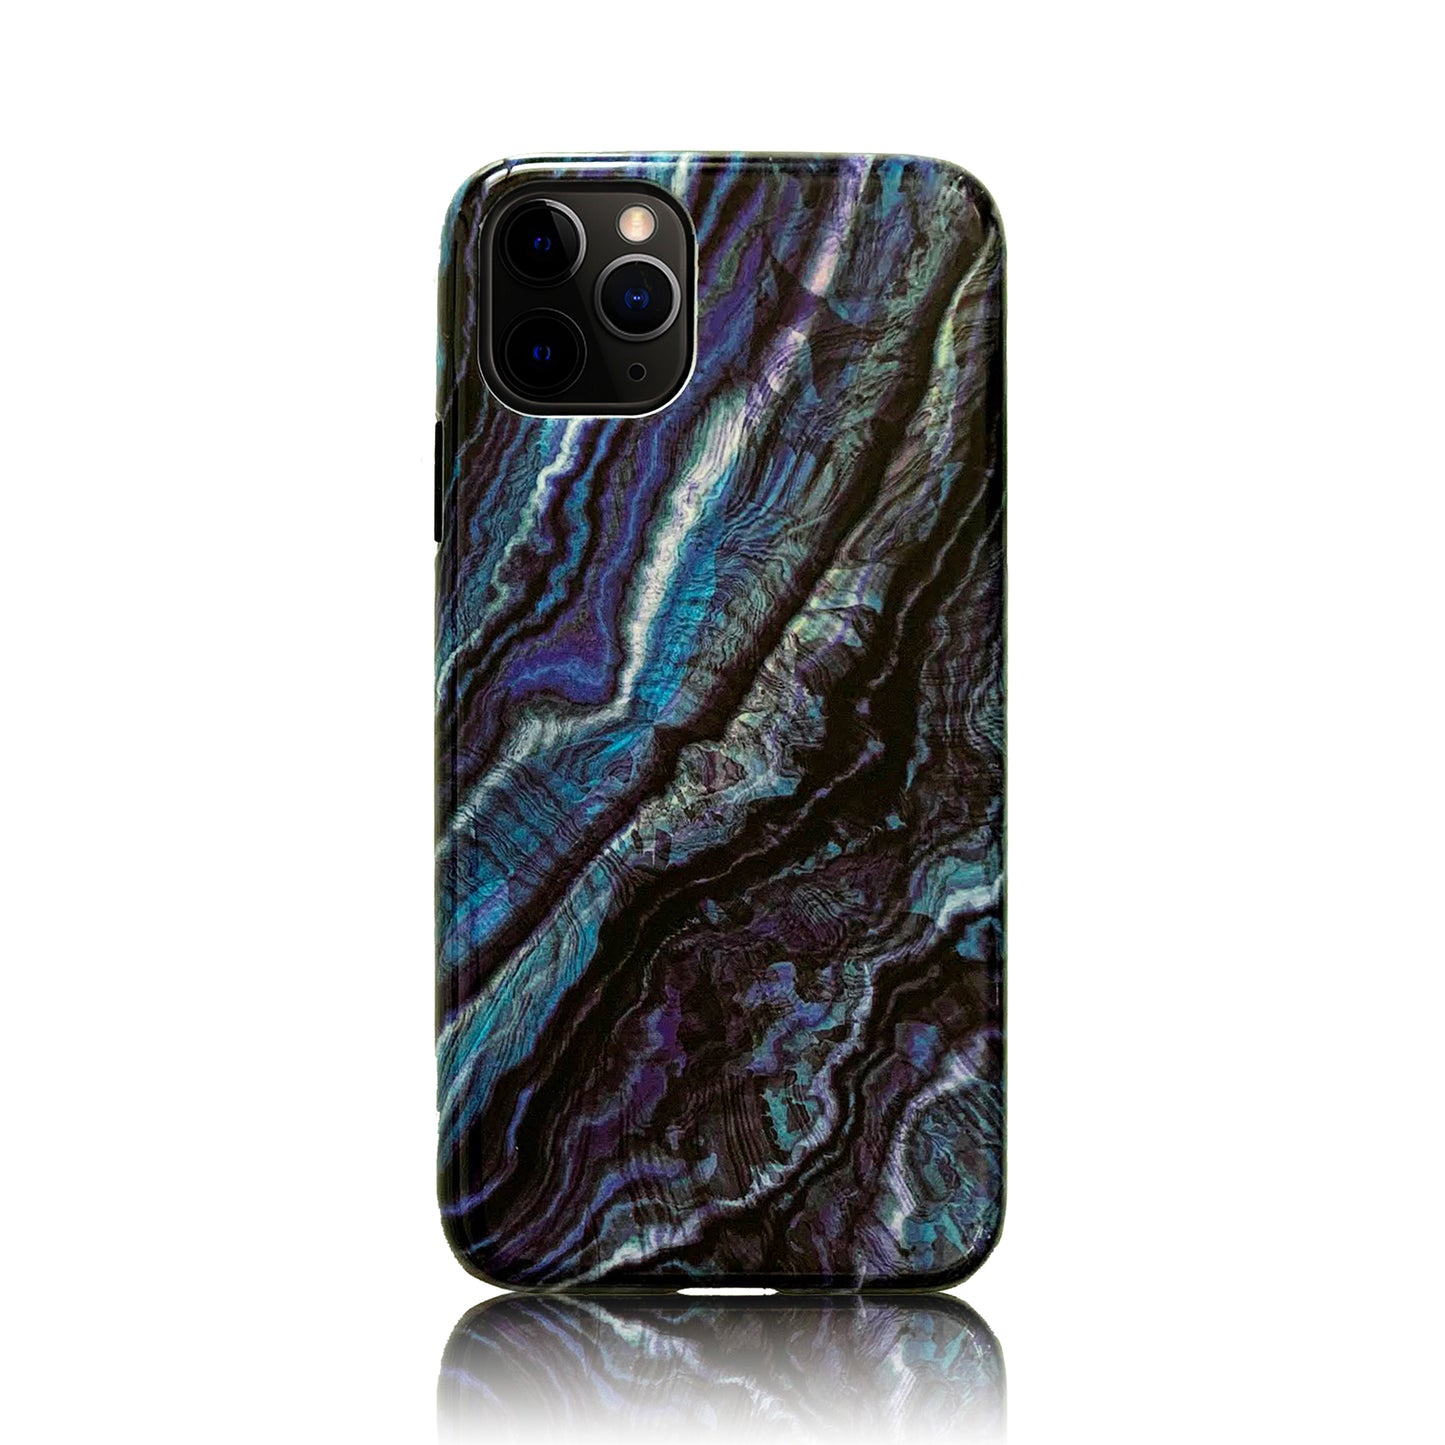 Blue and Black 3D Hybrid iPhone Case